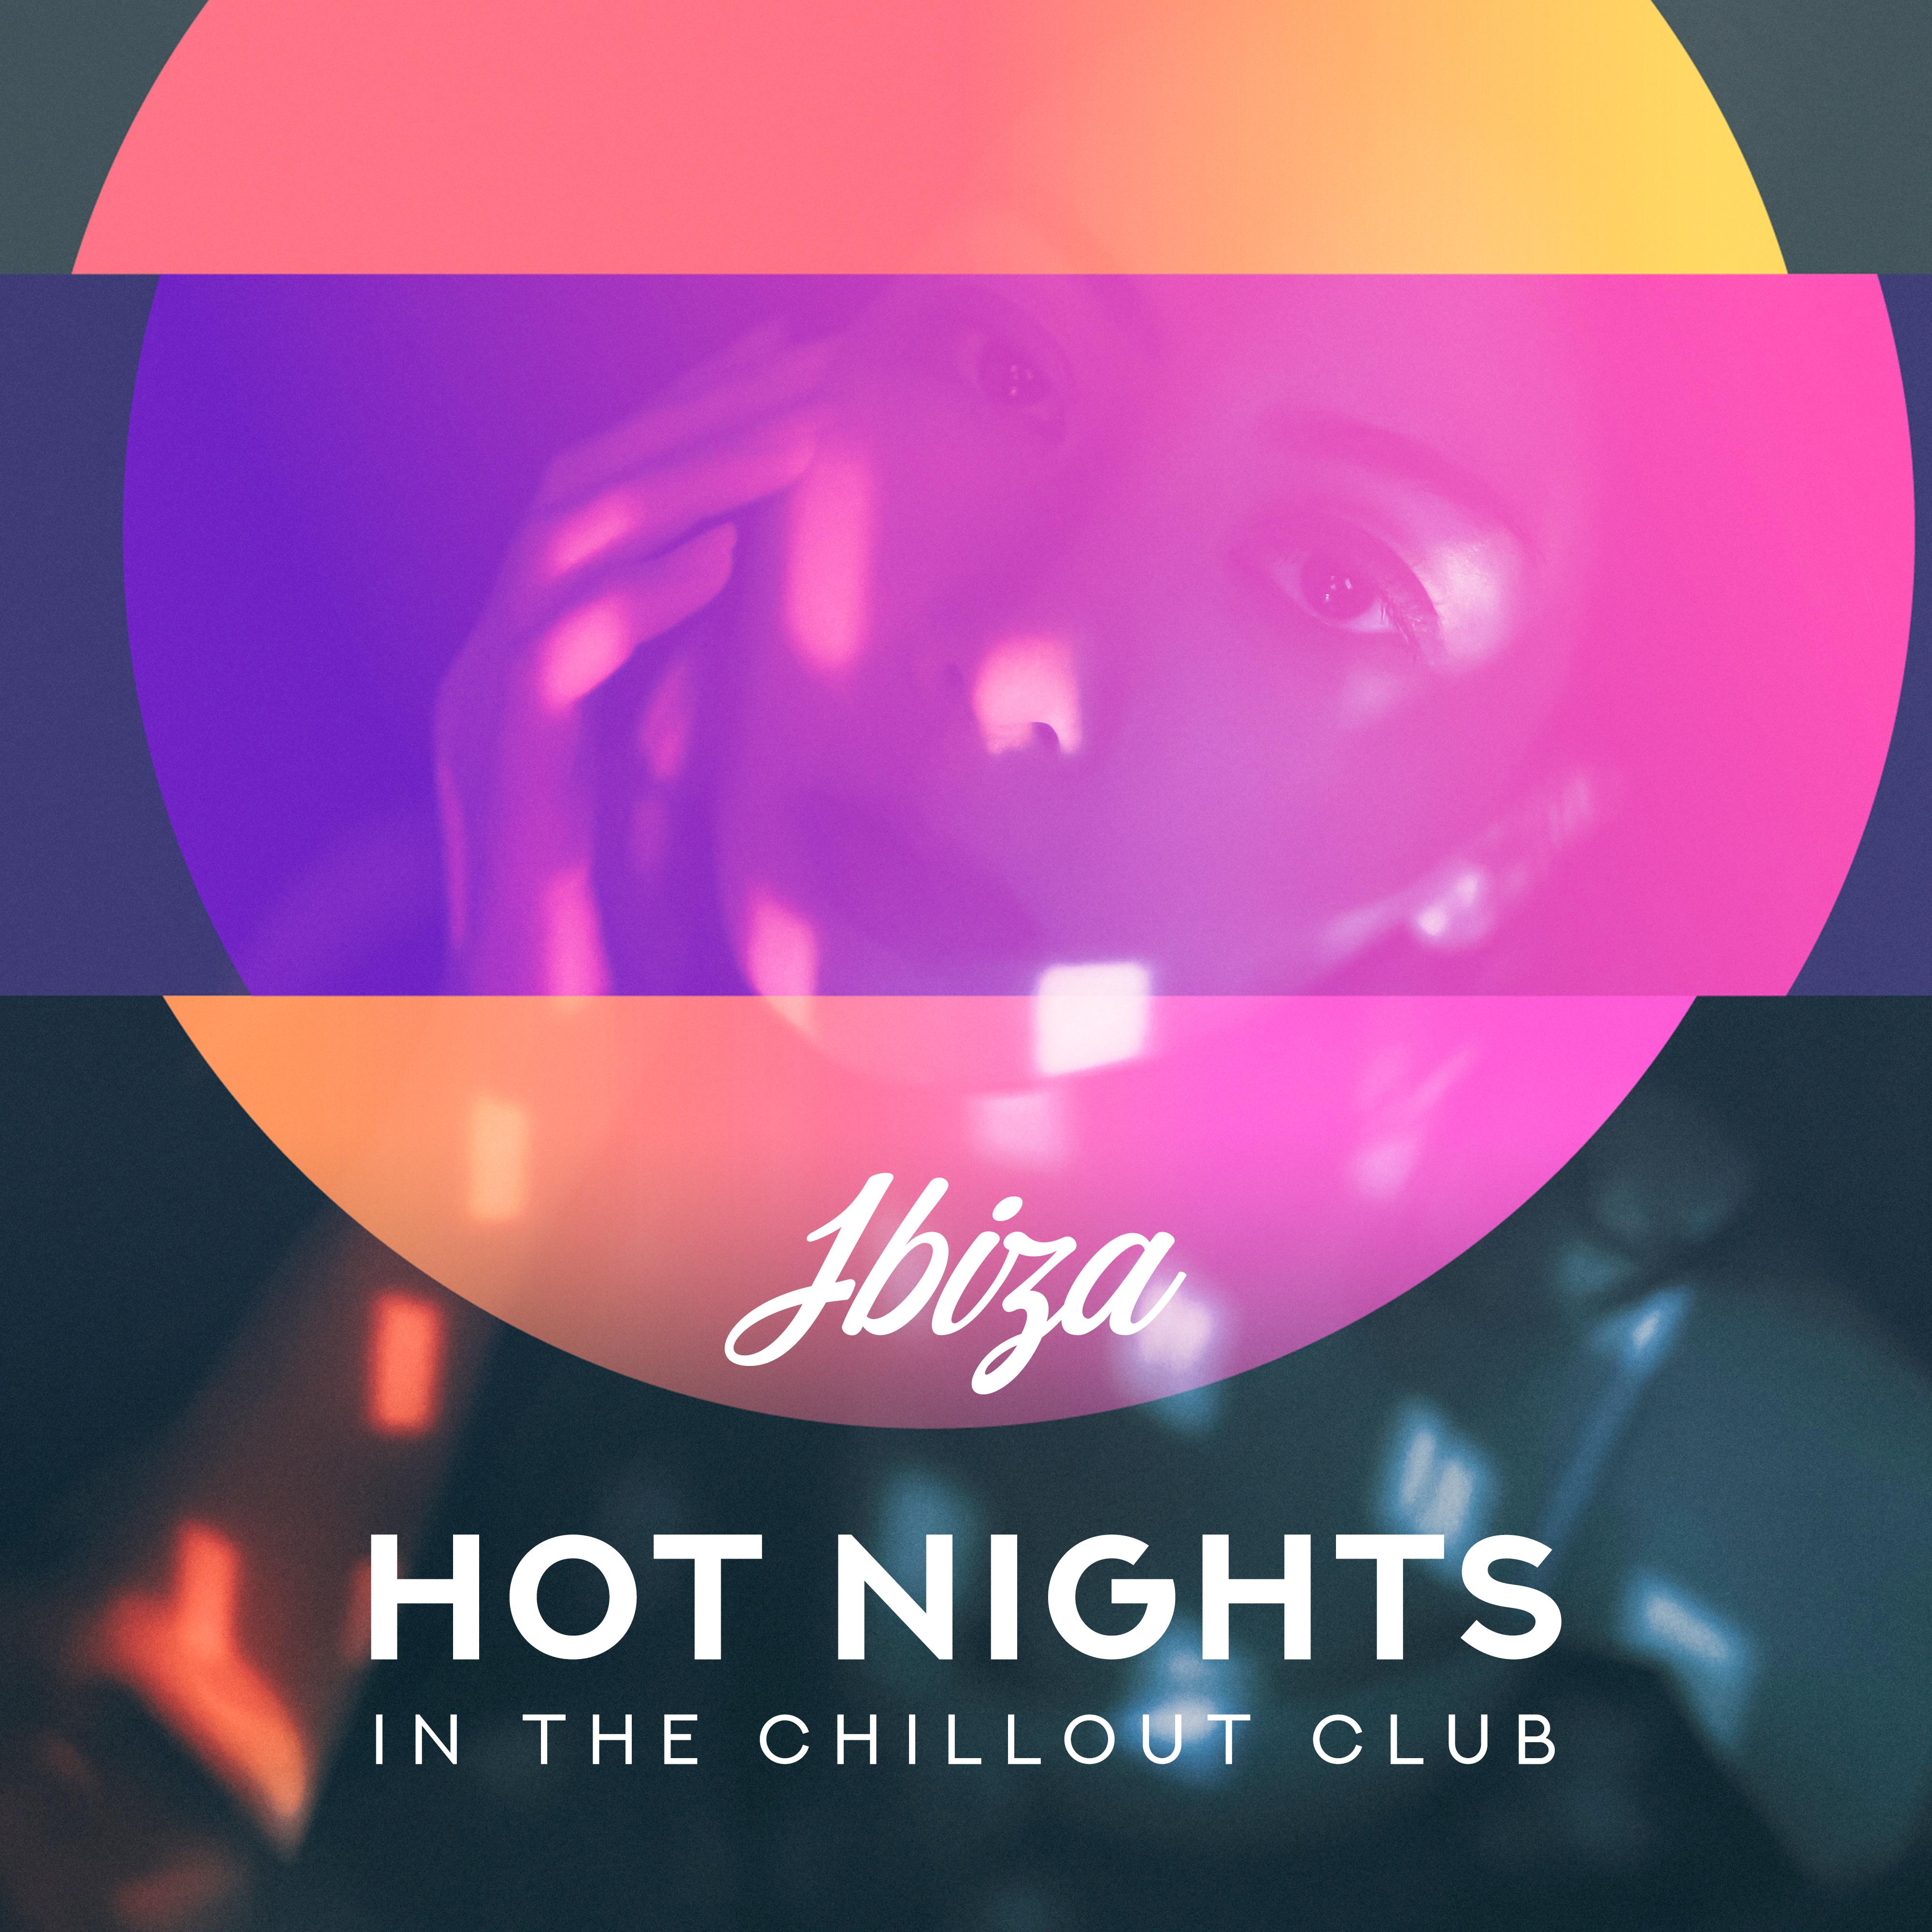 Ibiza Hot Nights in the Chillout Club: Party Chill Out 2019 Music, Energetic Low BPM Songs, Smooth Vibes, Dancing All Night Long